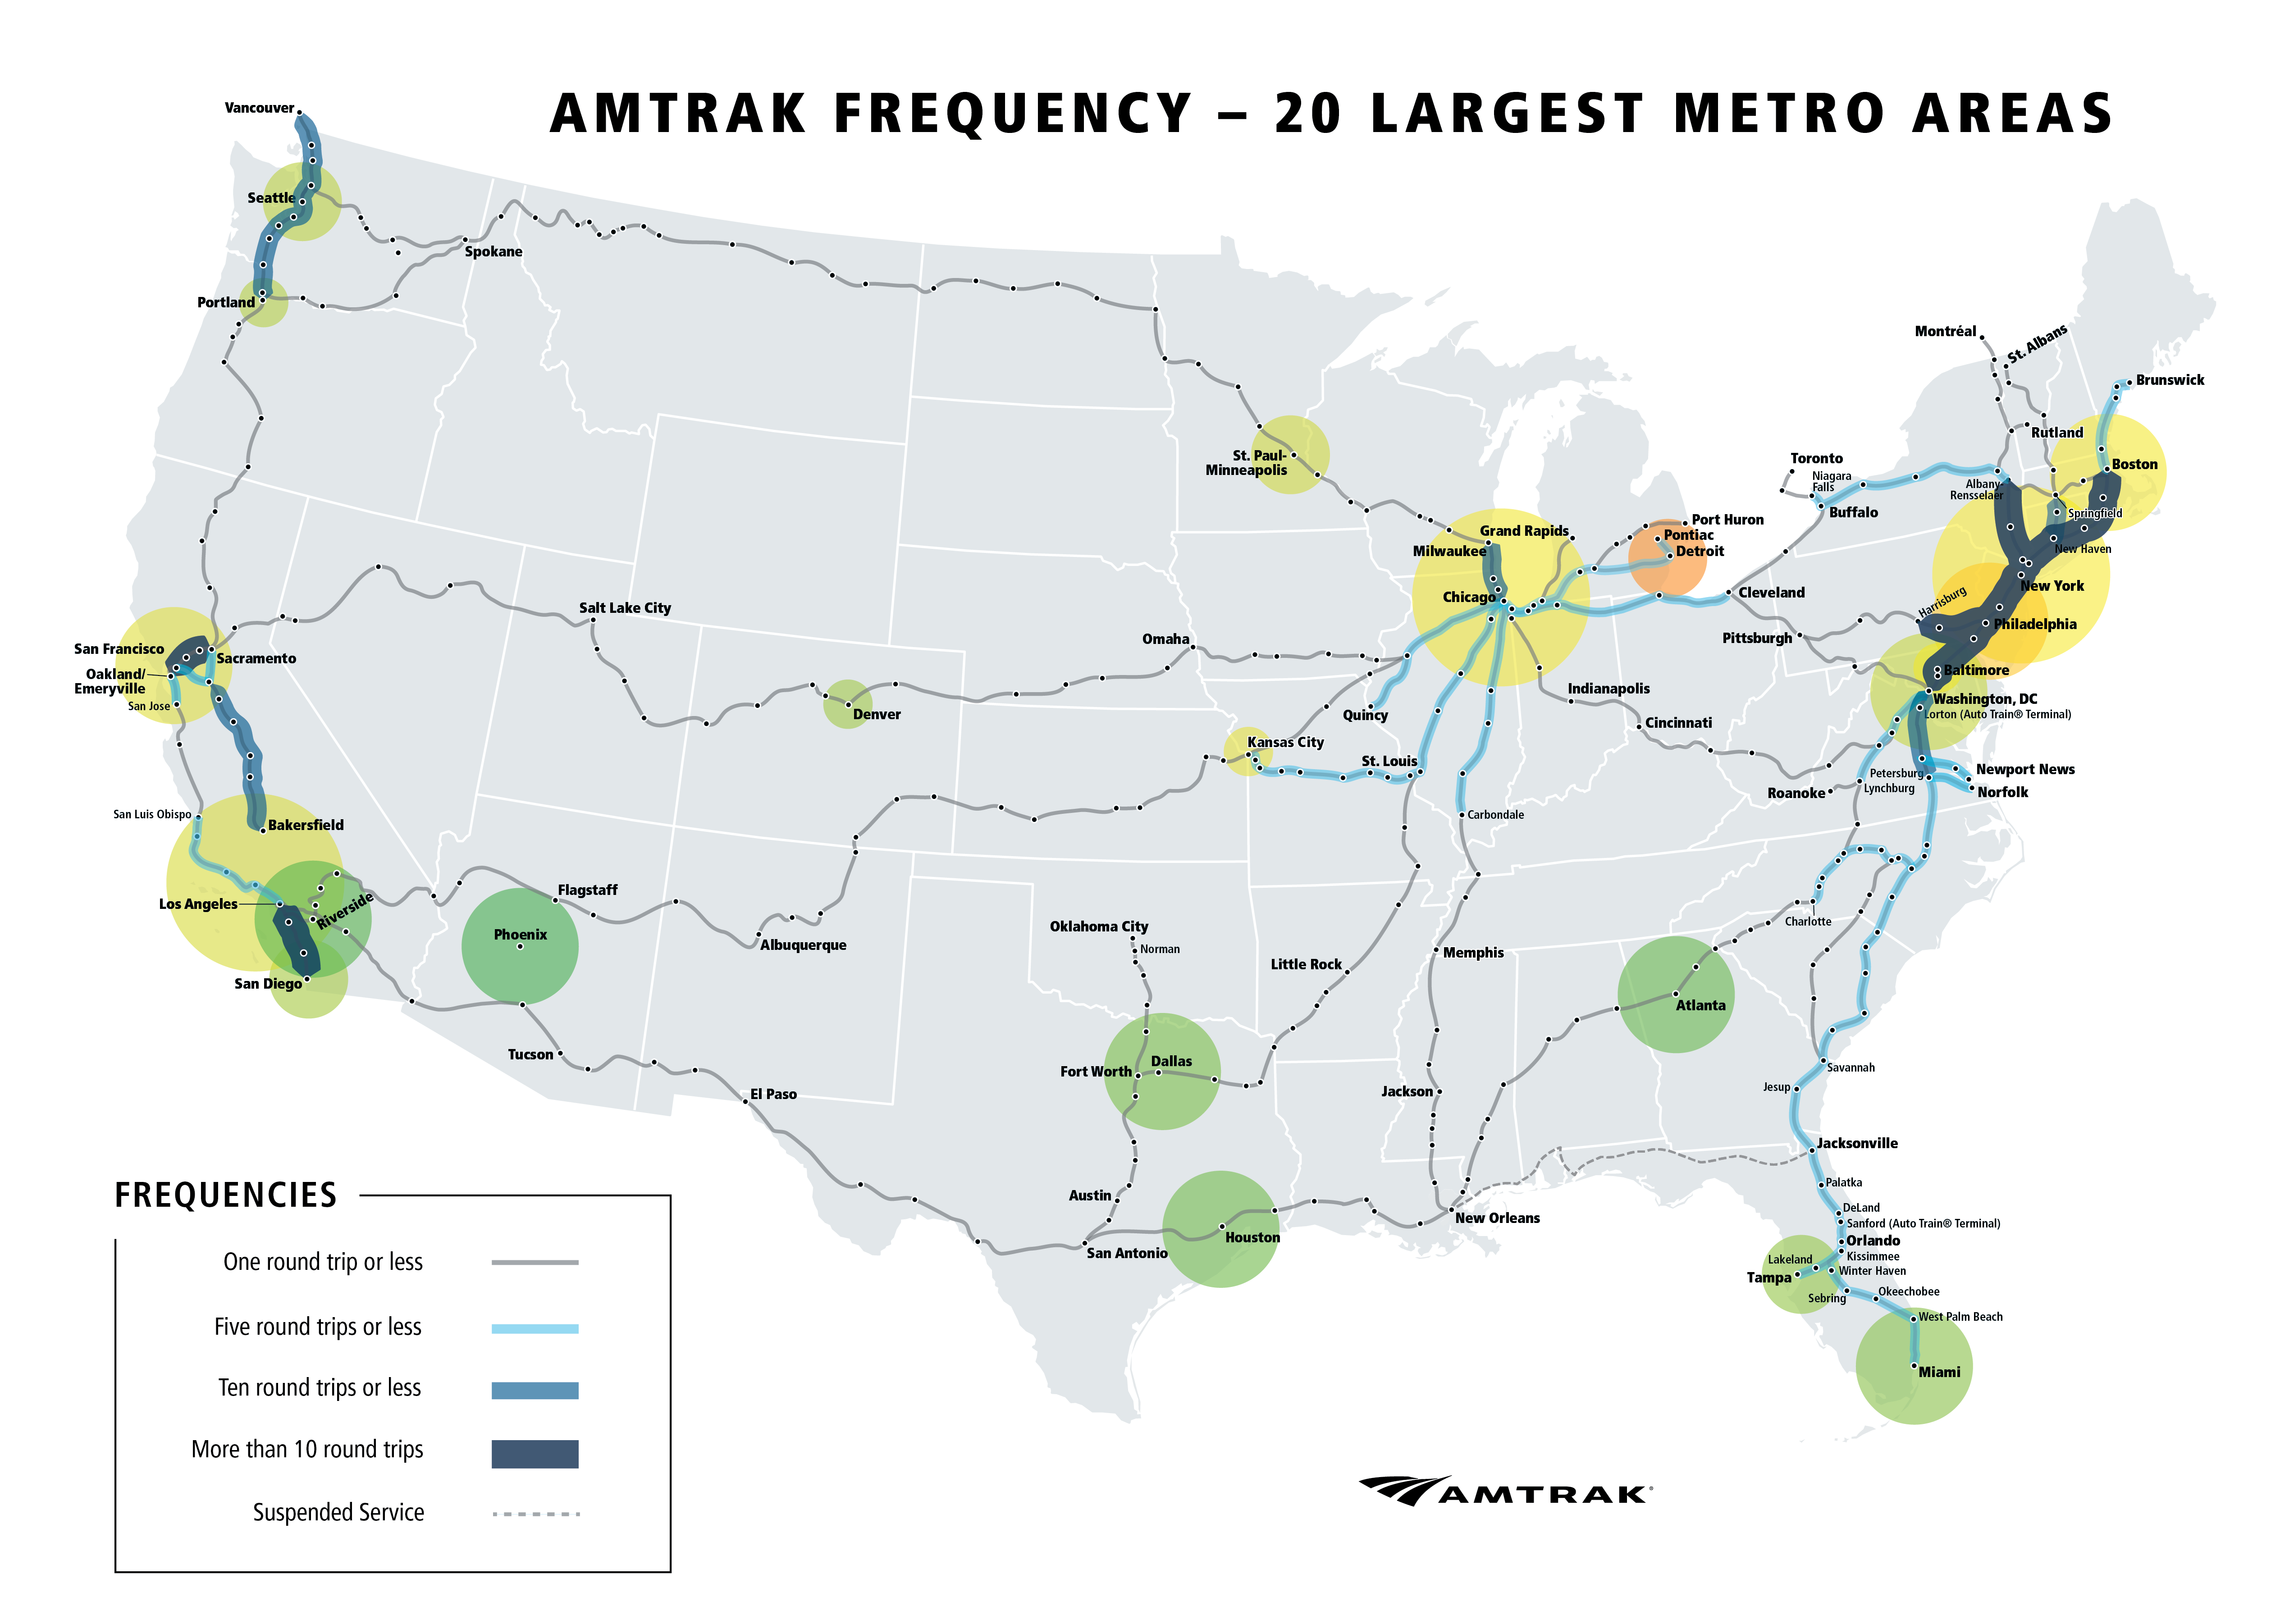 Amtrak frequency